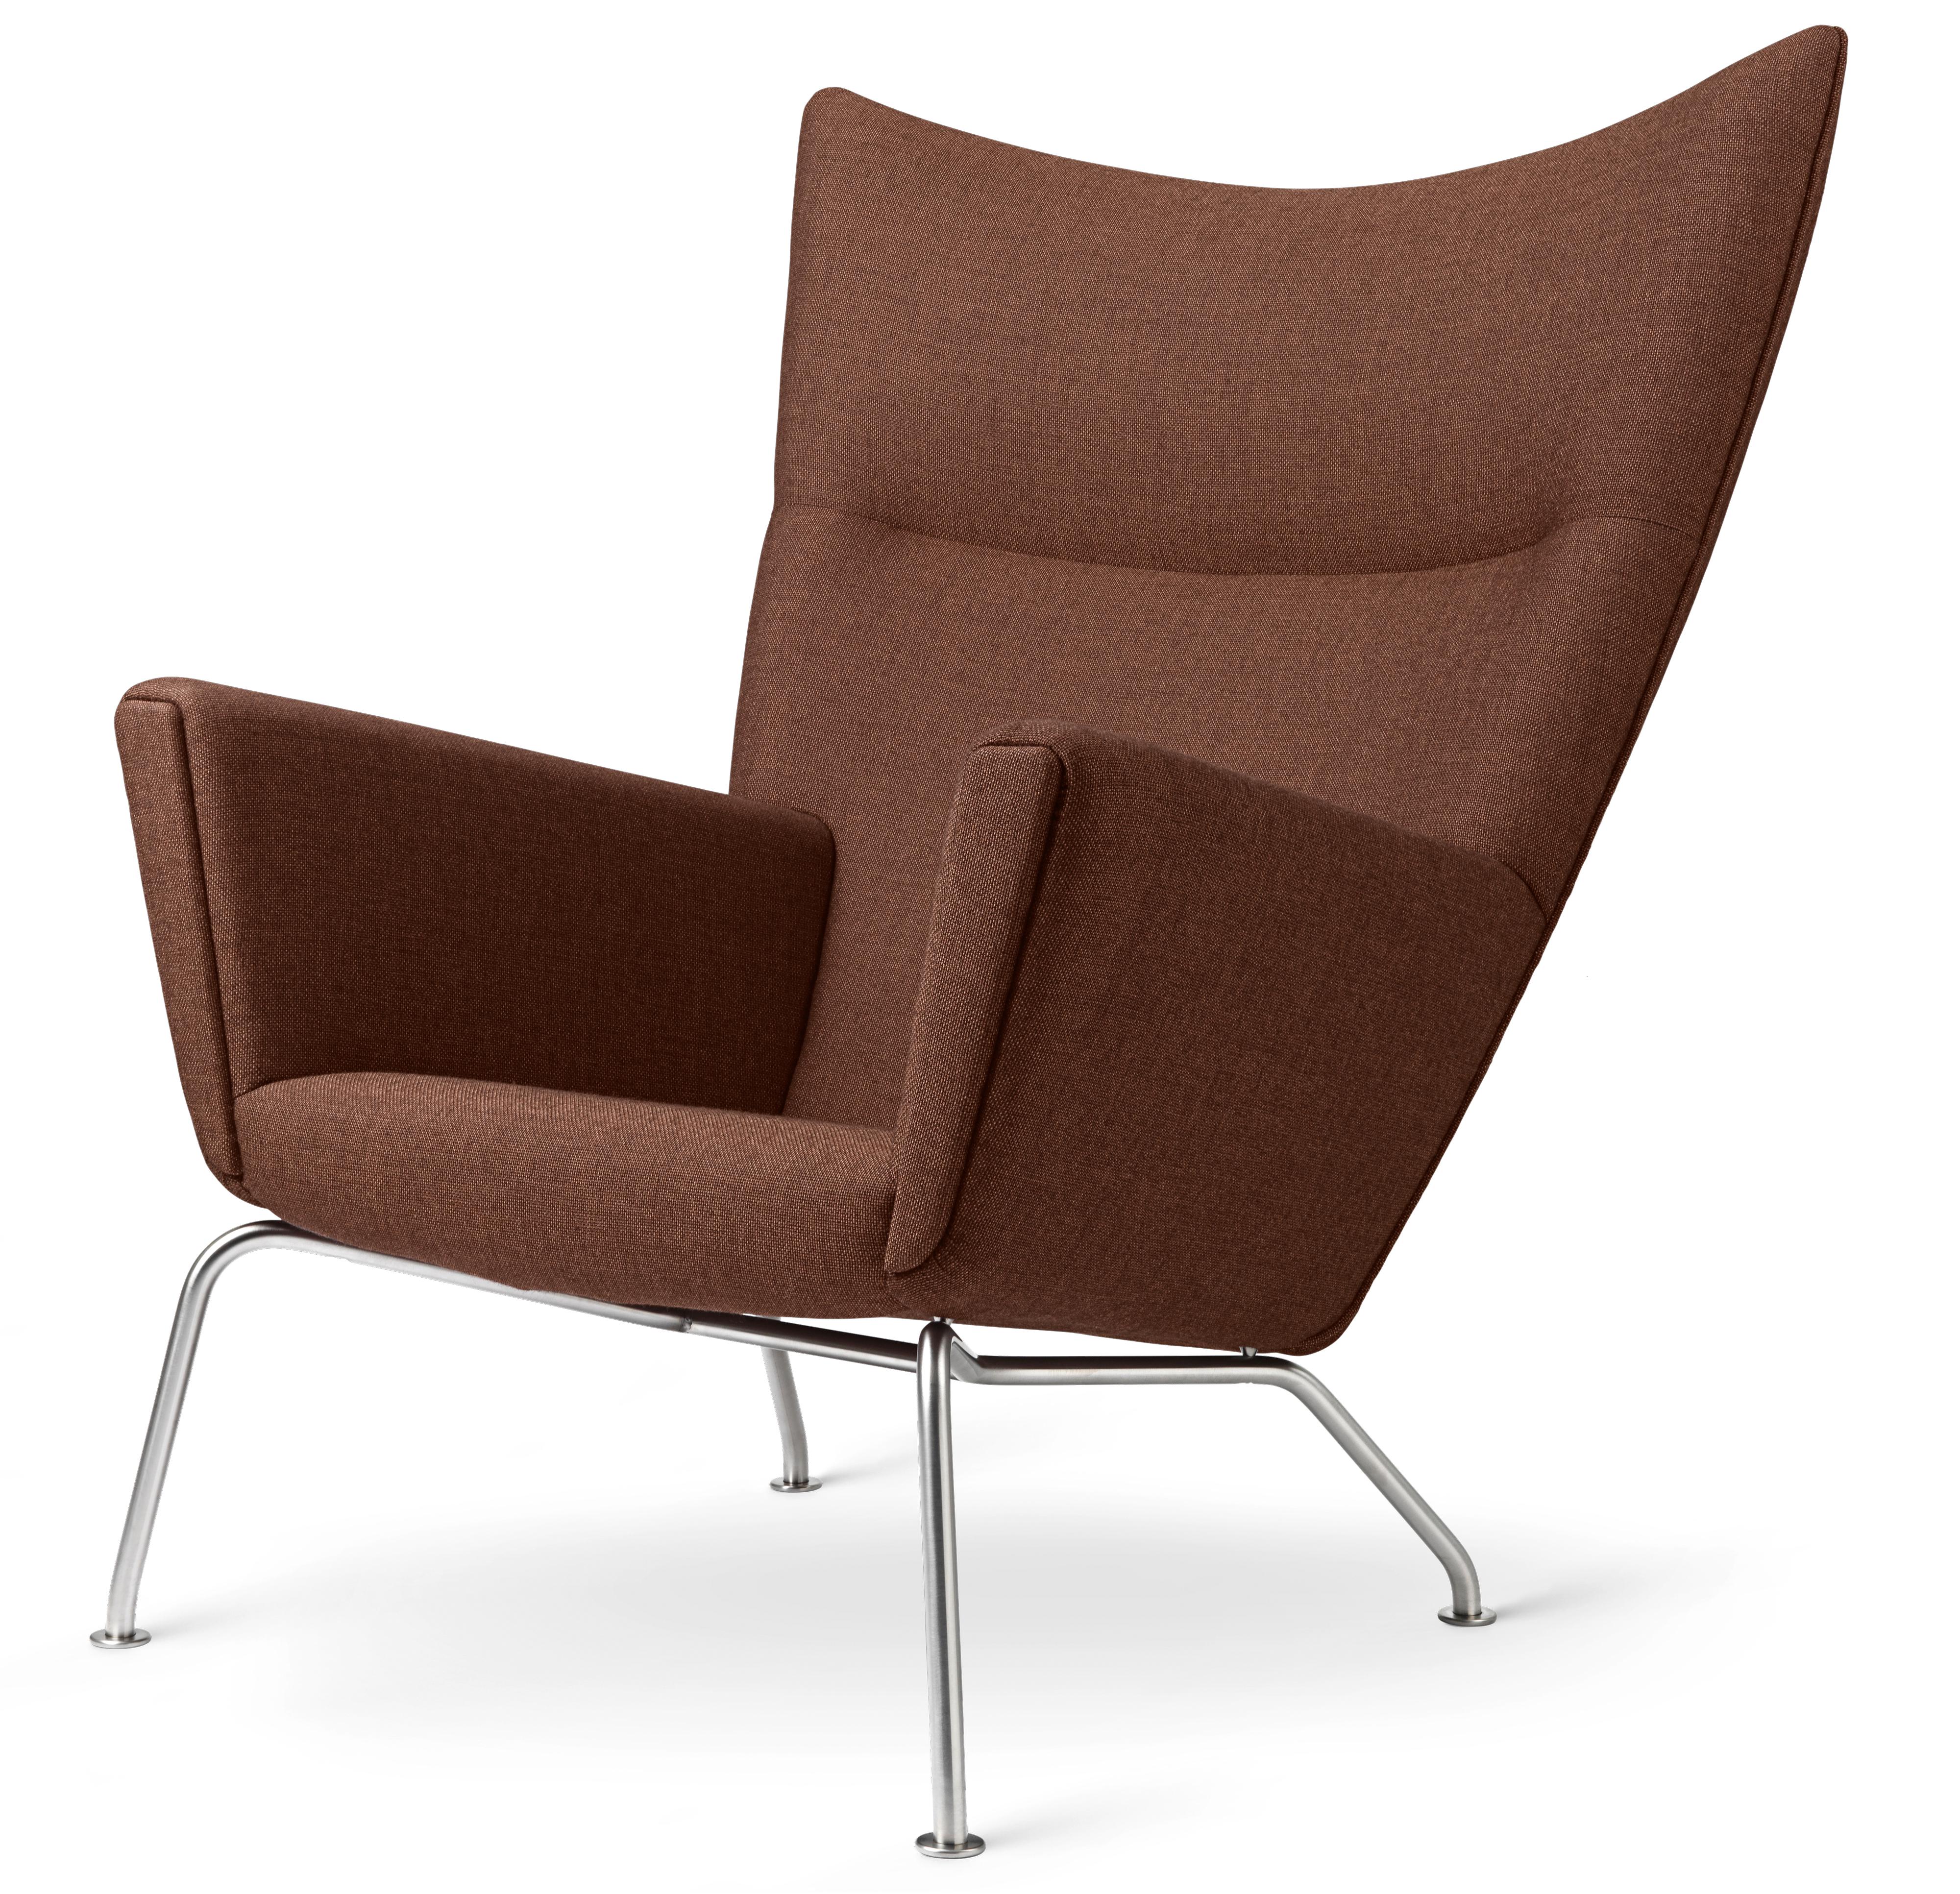 Carl Hansen CH445 Wing Chair Rustfrit Stål, Passion 7101